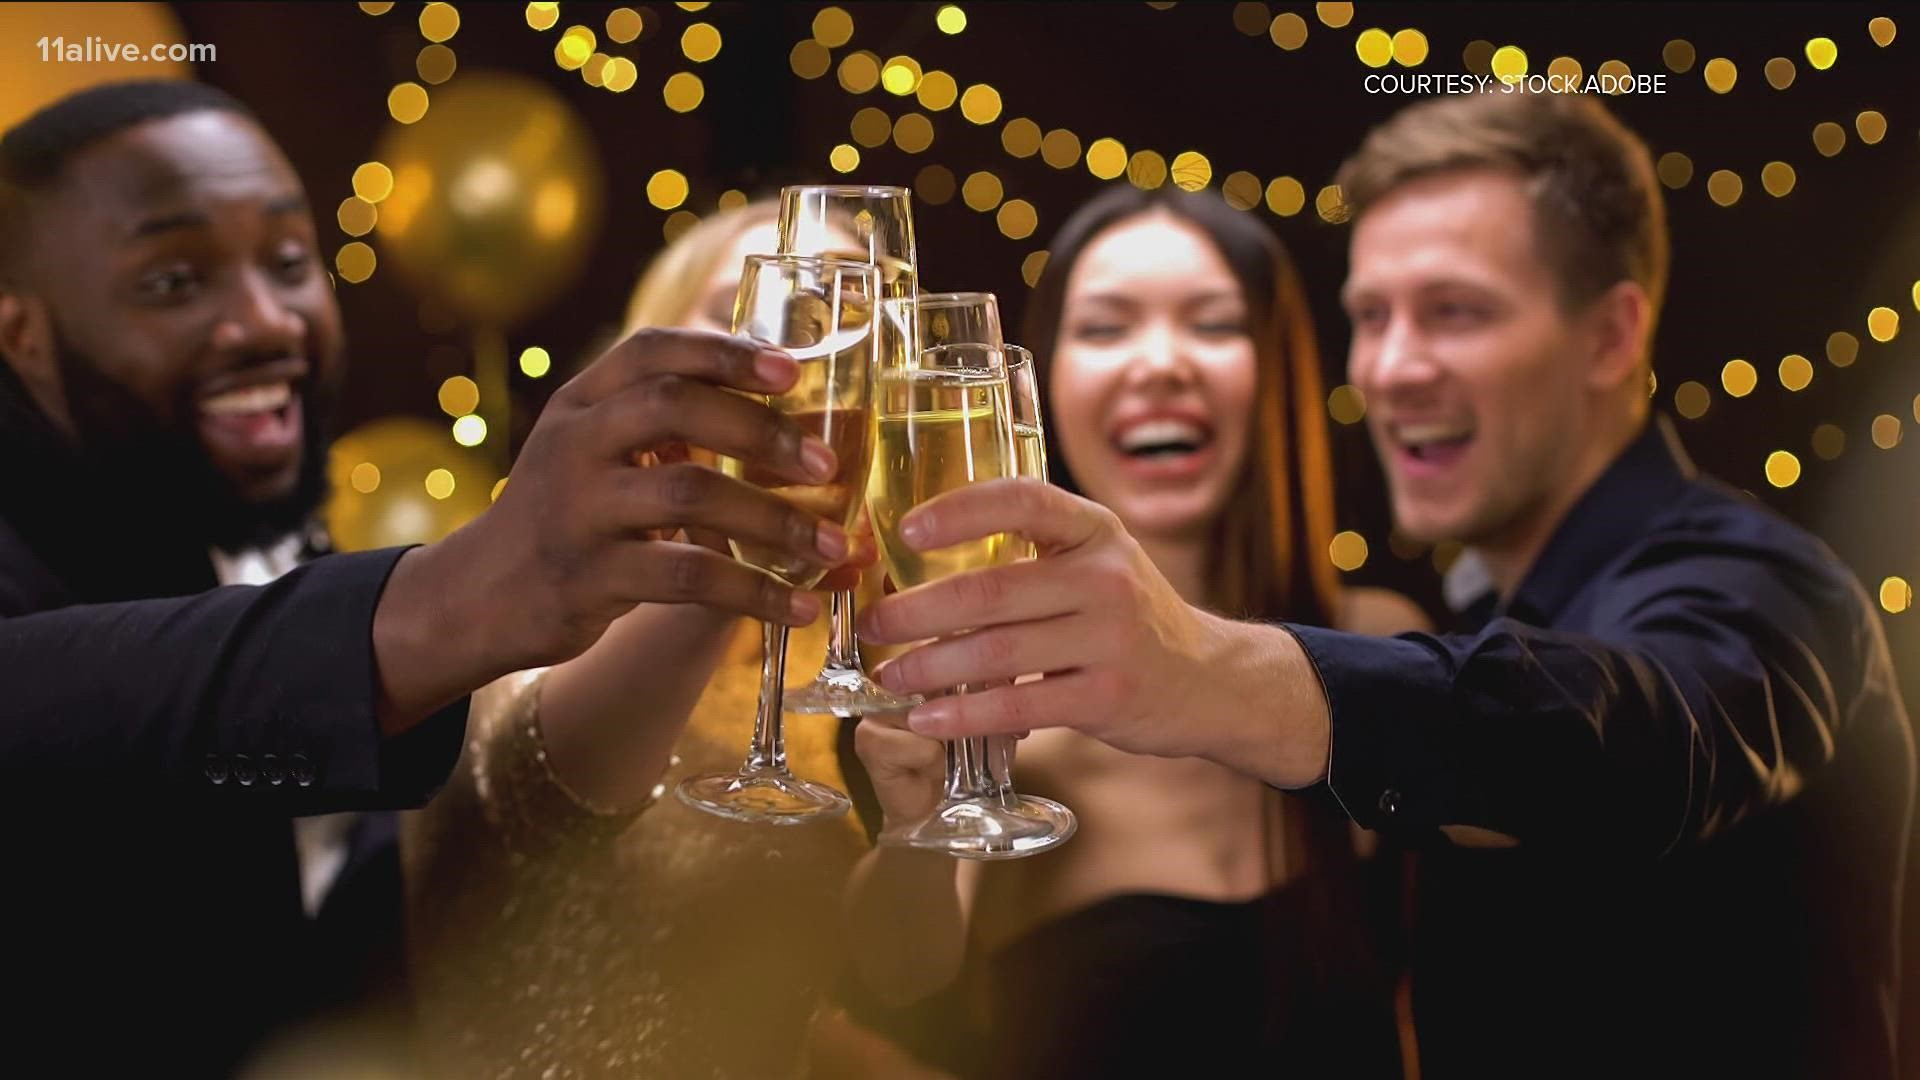 People could disrupt their sleep during the holidays with their alcohol intake.